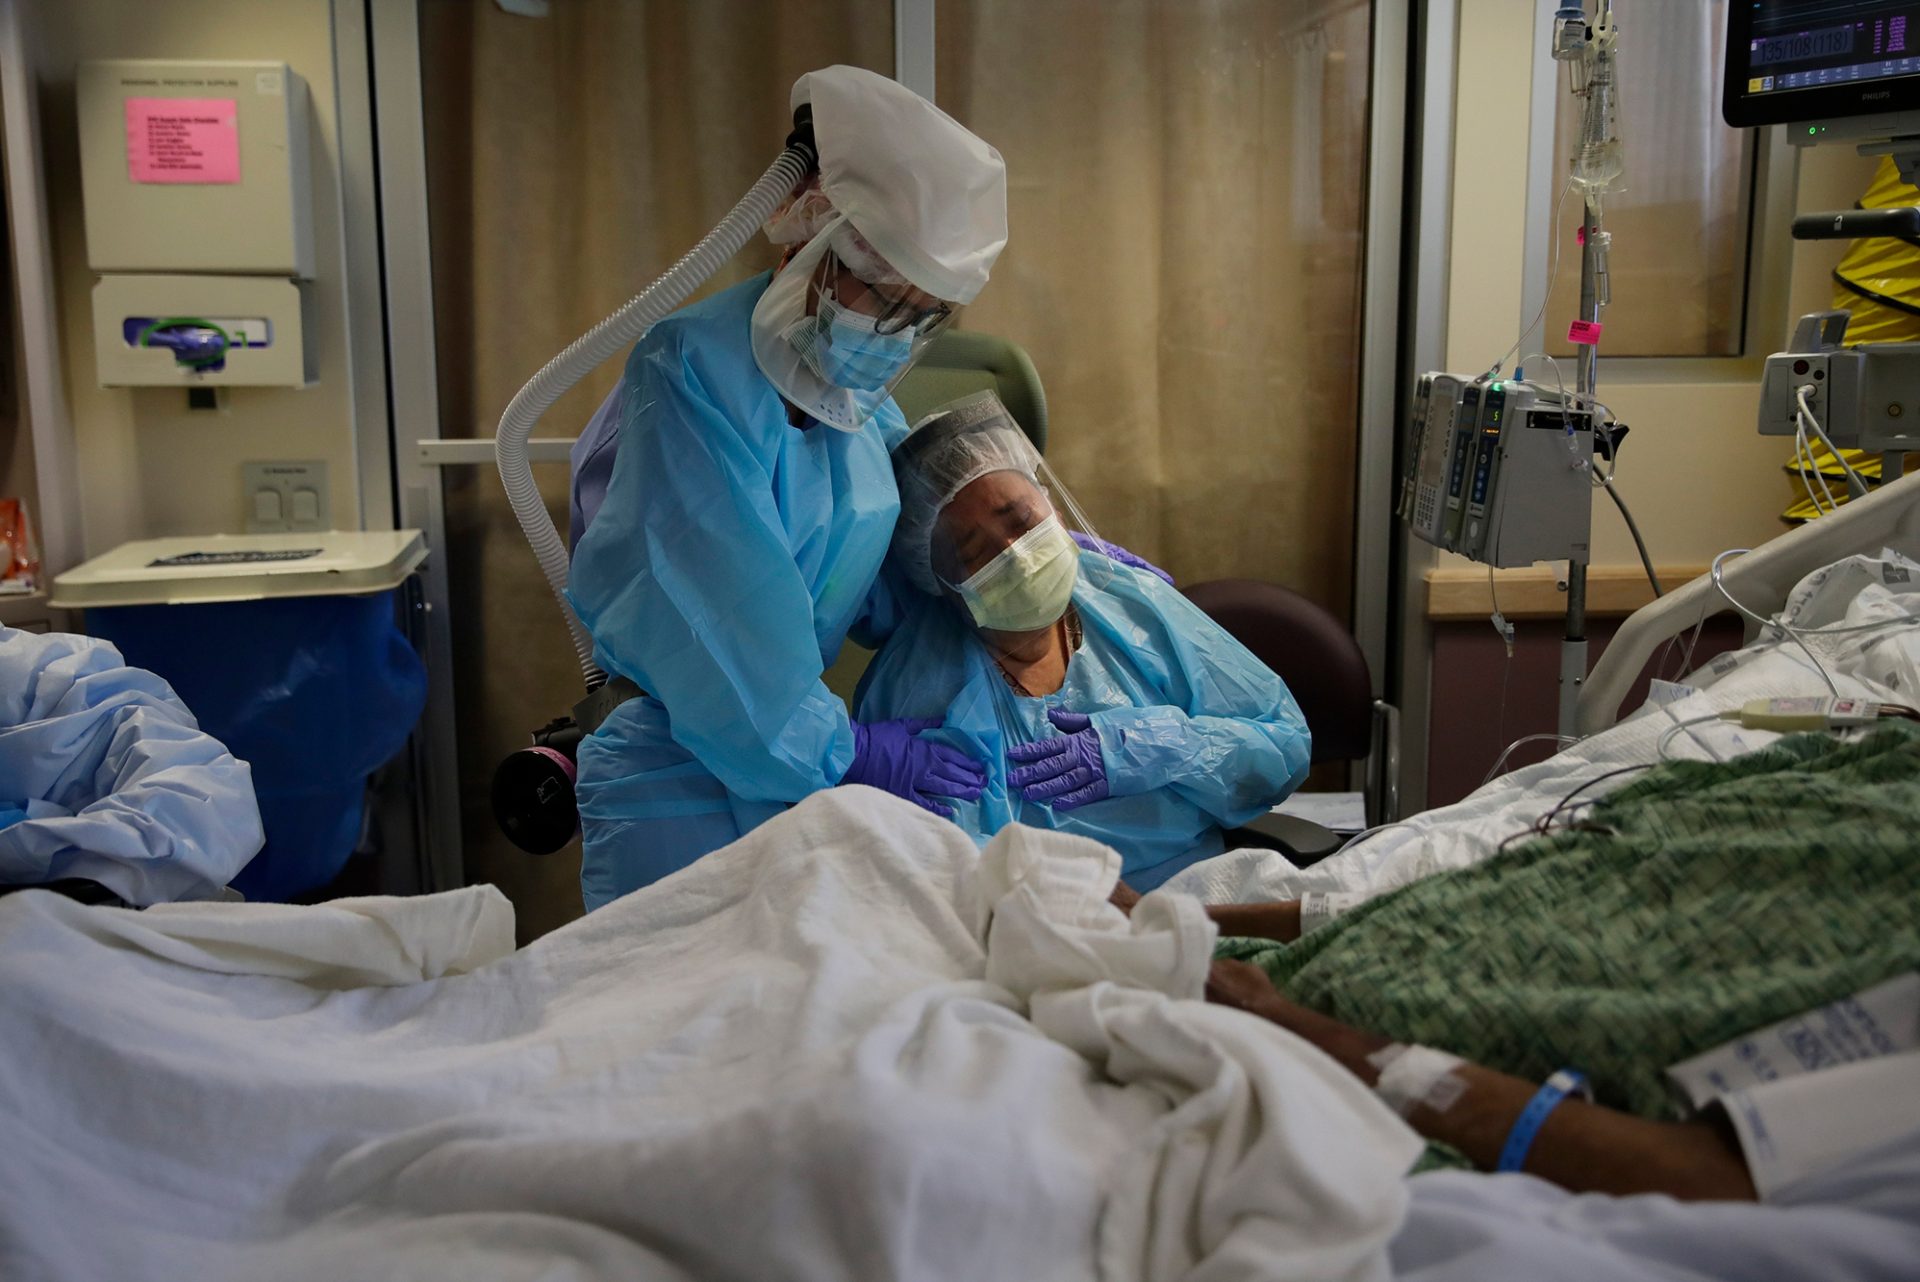 FILE PHOTO: In this July 31, 2020, file photo, Romelia Navarro, right, is comforted by nurse Michele Younkin, left, as she weeps while sitting at the bedside of her dying husband, Antonio Navarro, in St. Jude Medical Center's COVID-19 unit in Fullerton, Calif. Antonio was Younkin's first COVID-19 patient to pass on her watch.